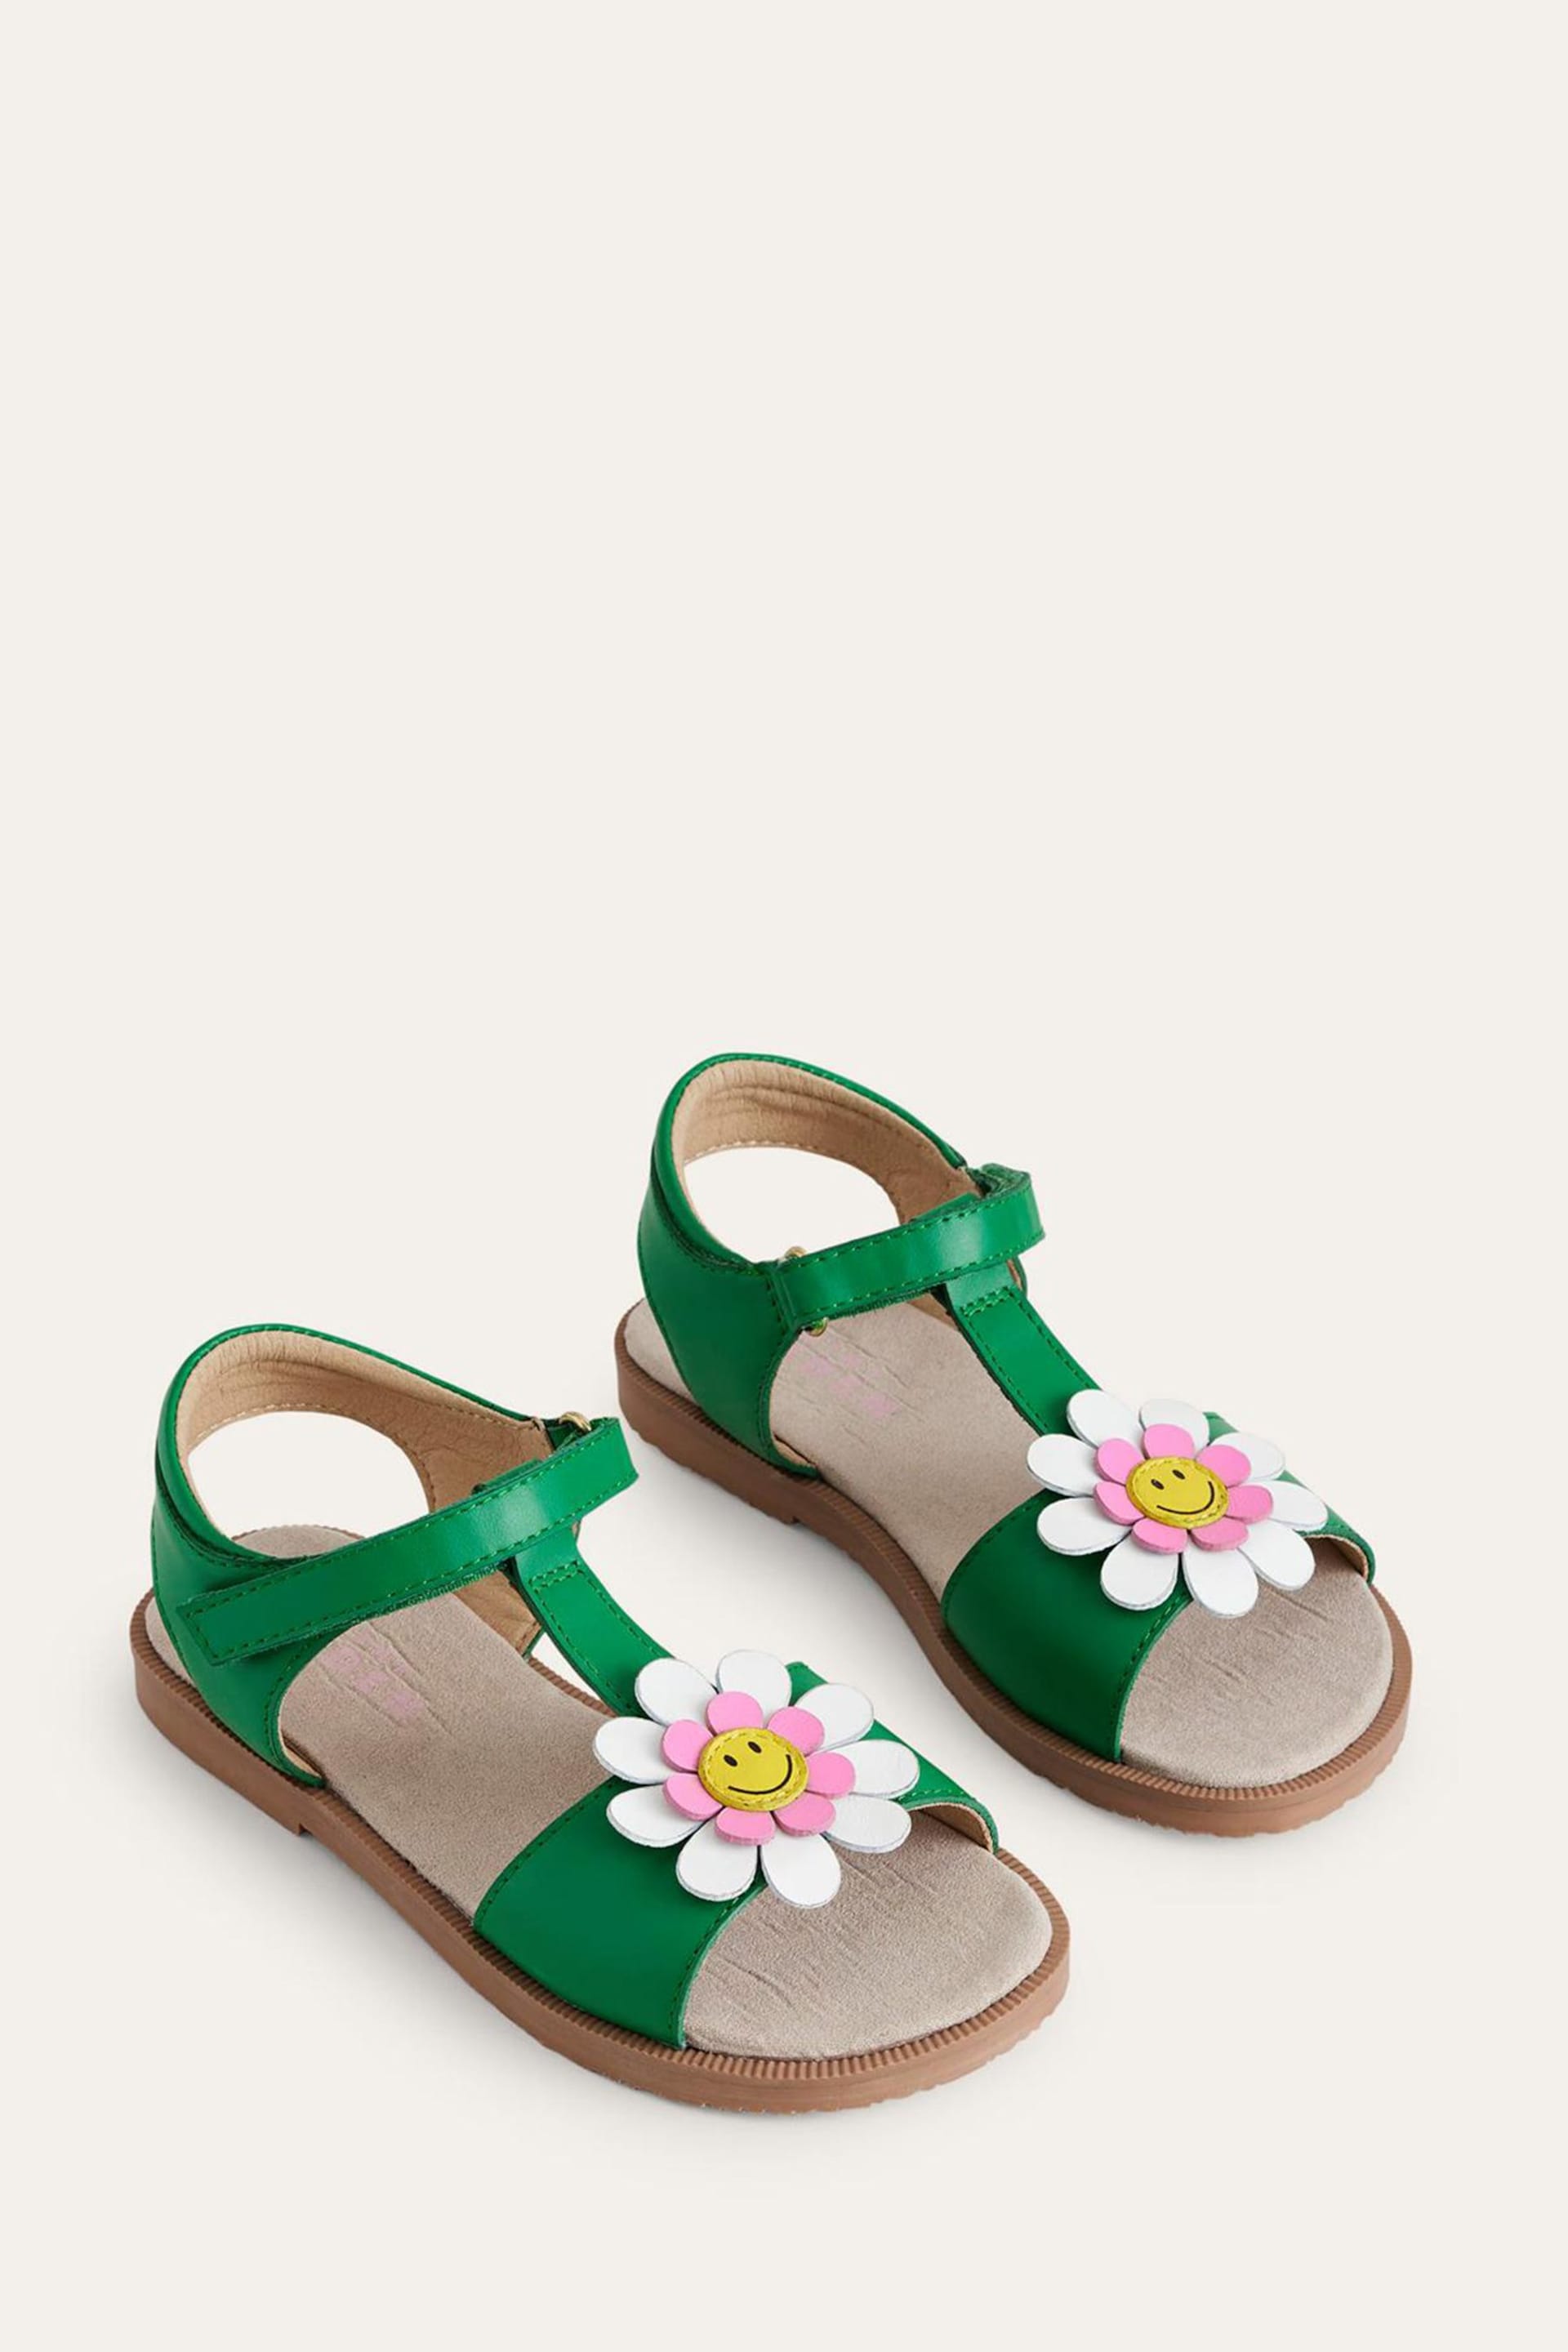 Boden Green Fun Leather Sandals - Image 1 of 4